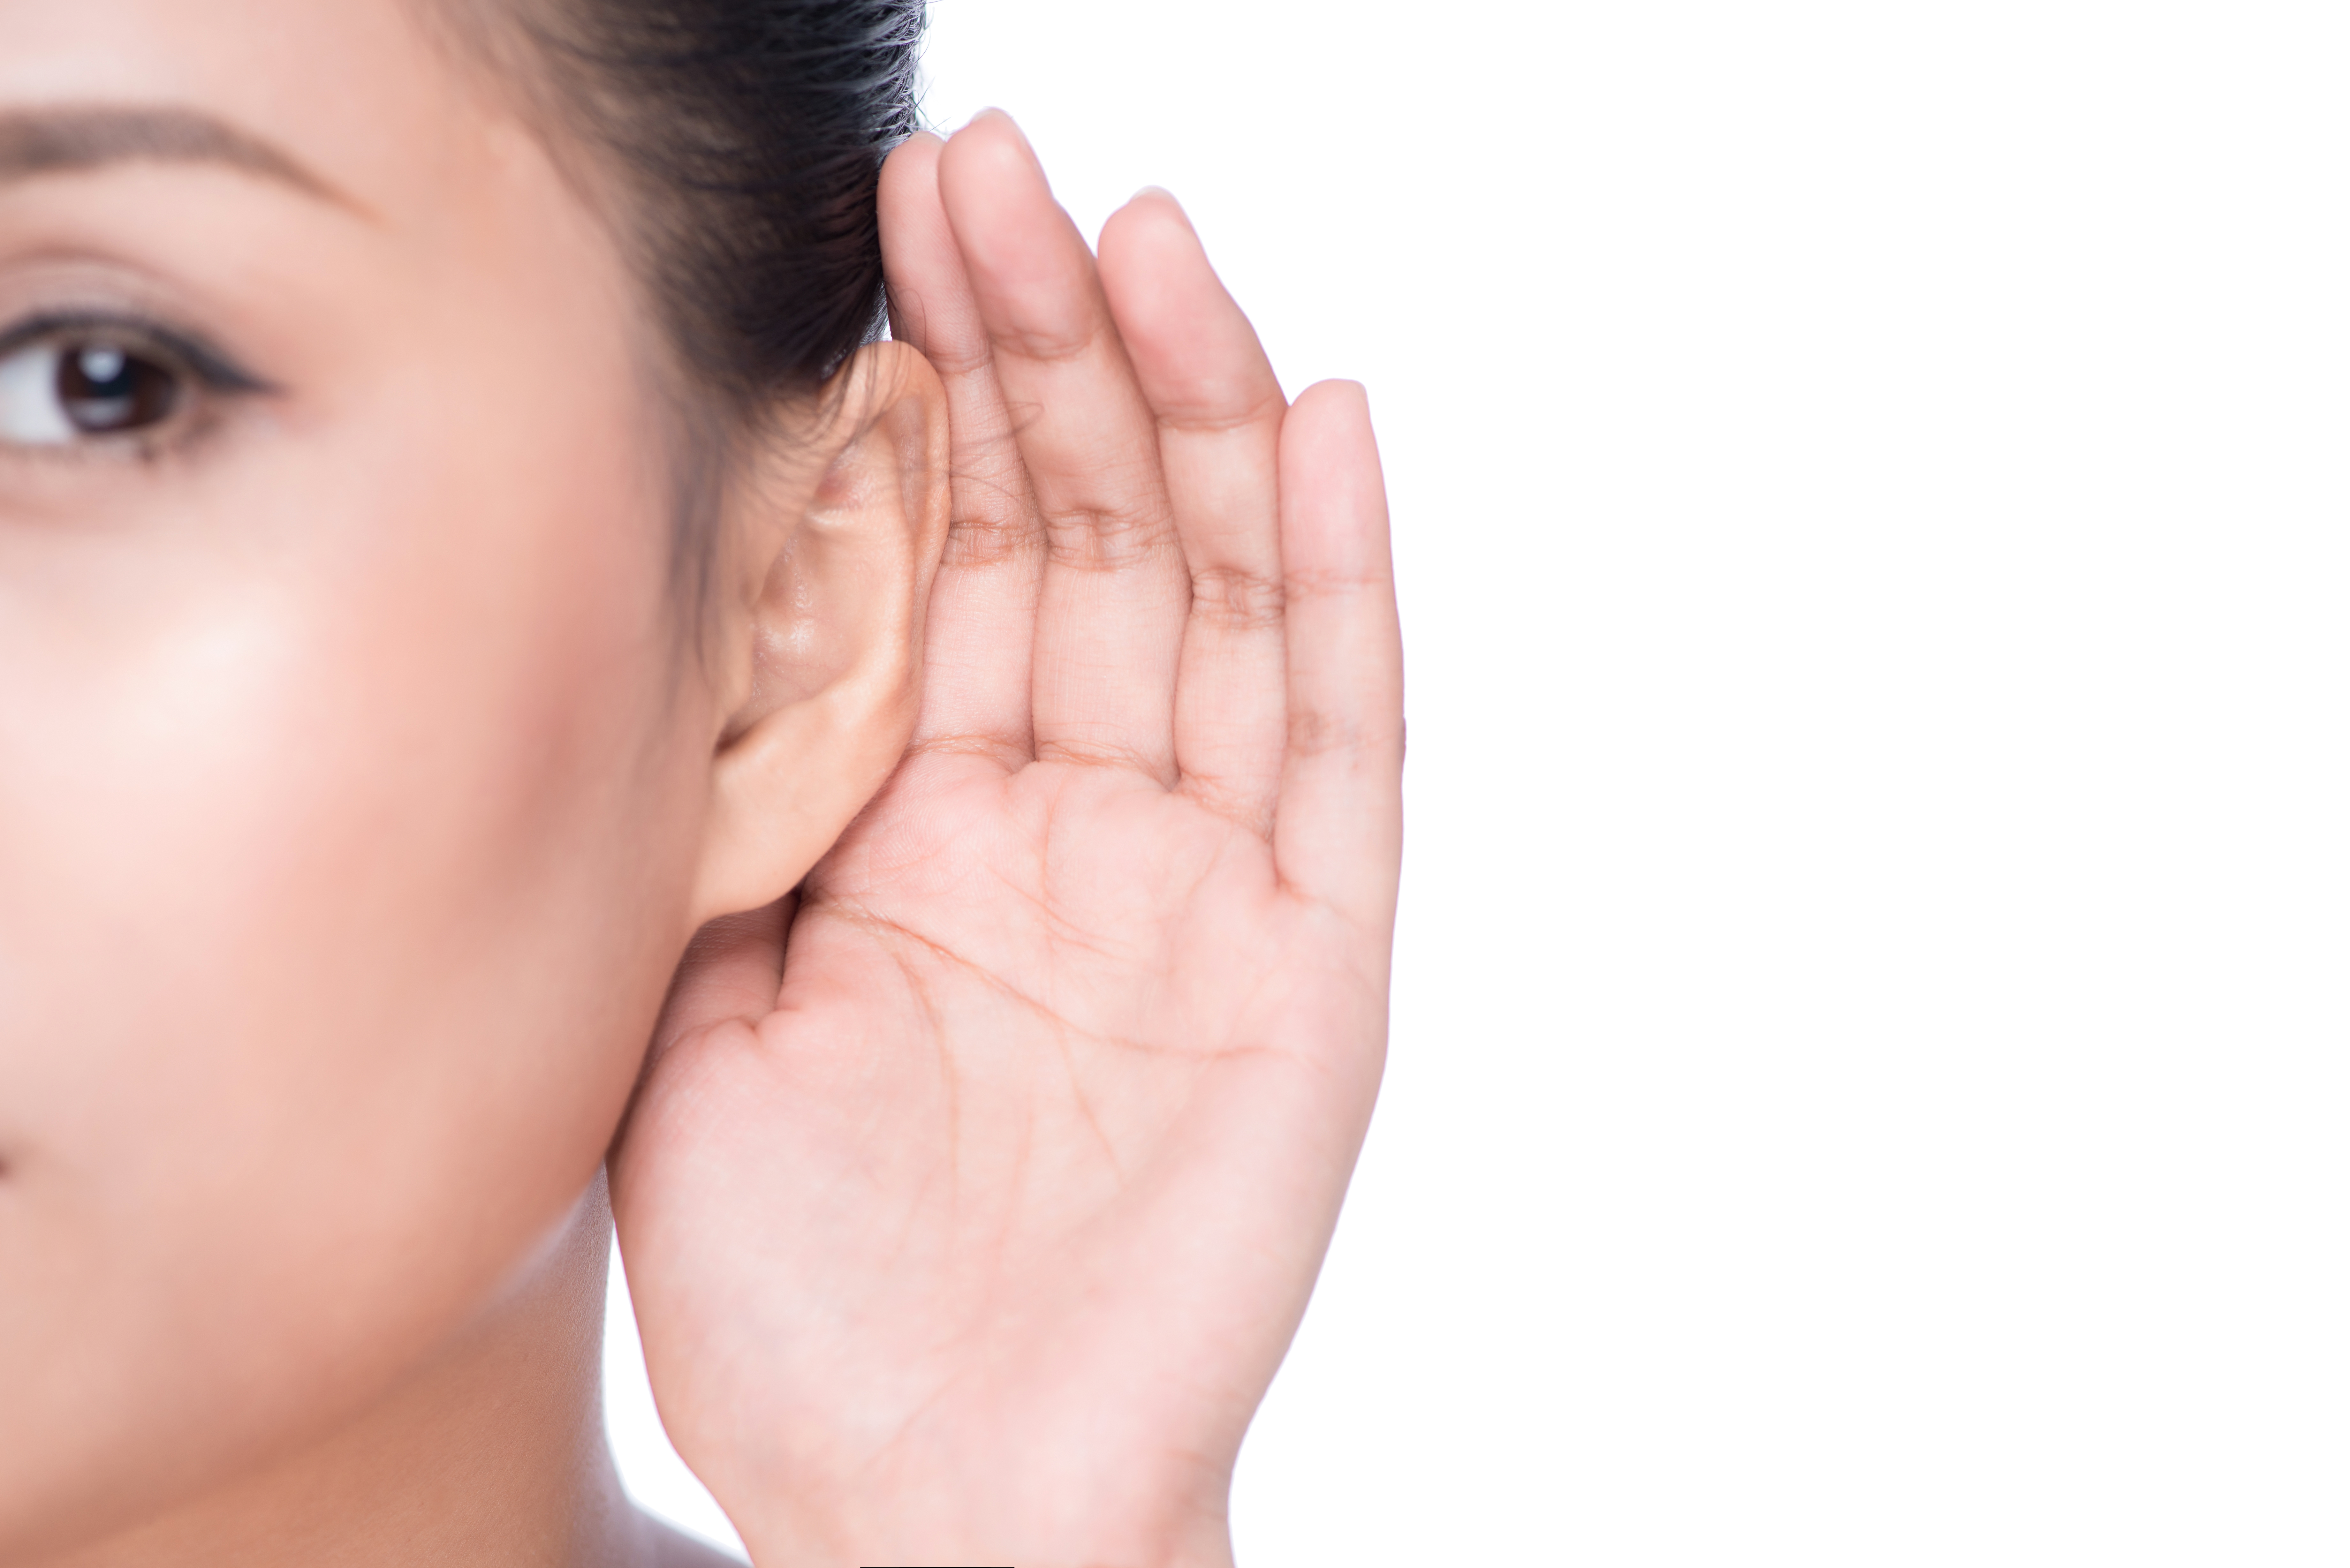 Hearing loss in one Ear: What's new in treatment?